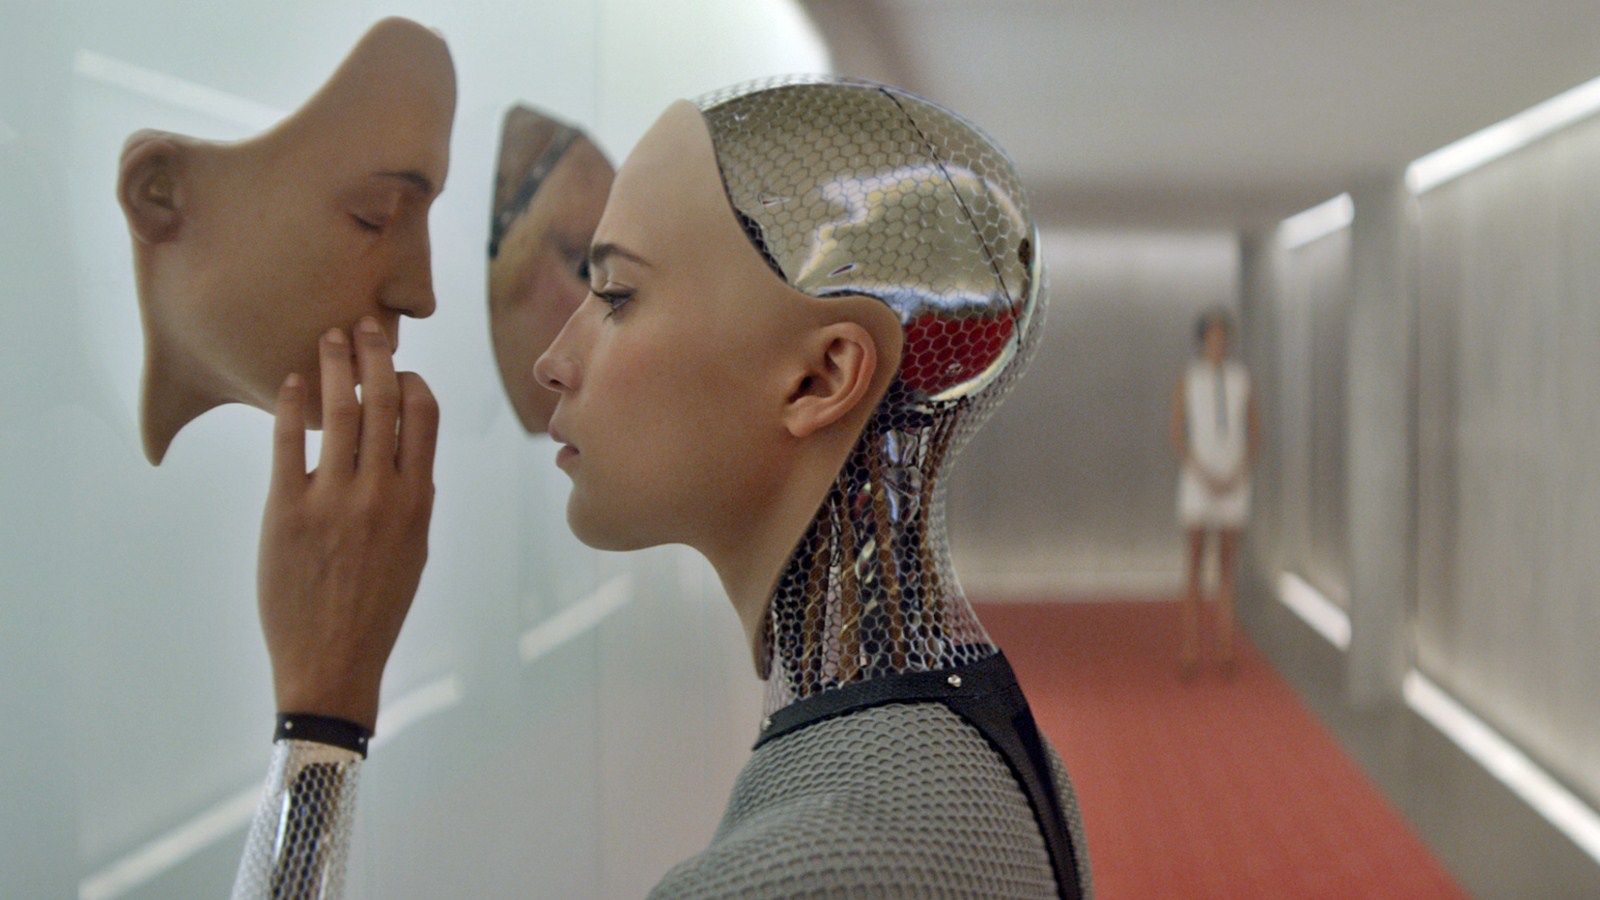 ava from ex machina, touching a model of her own face